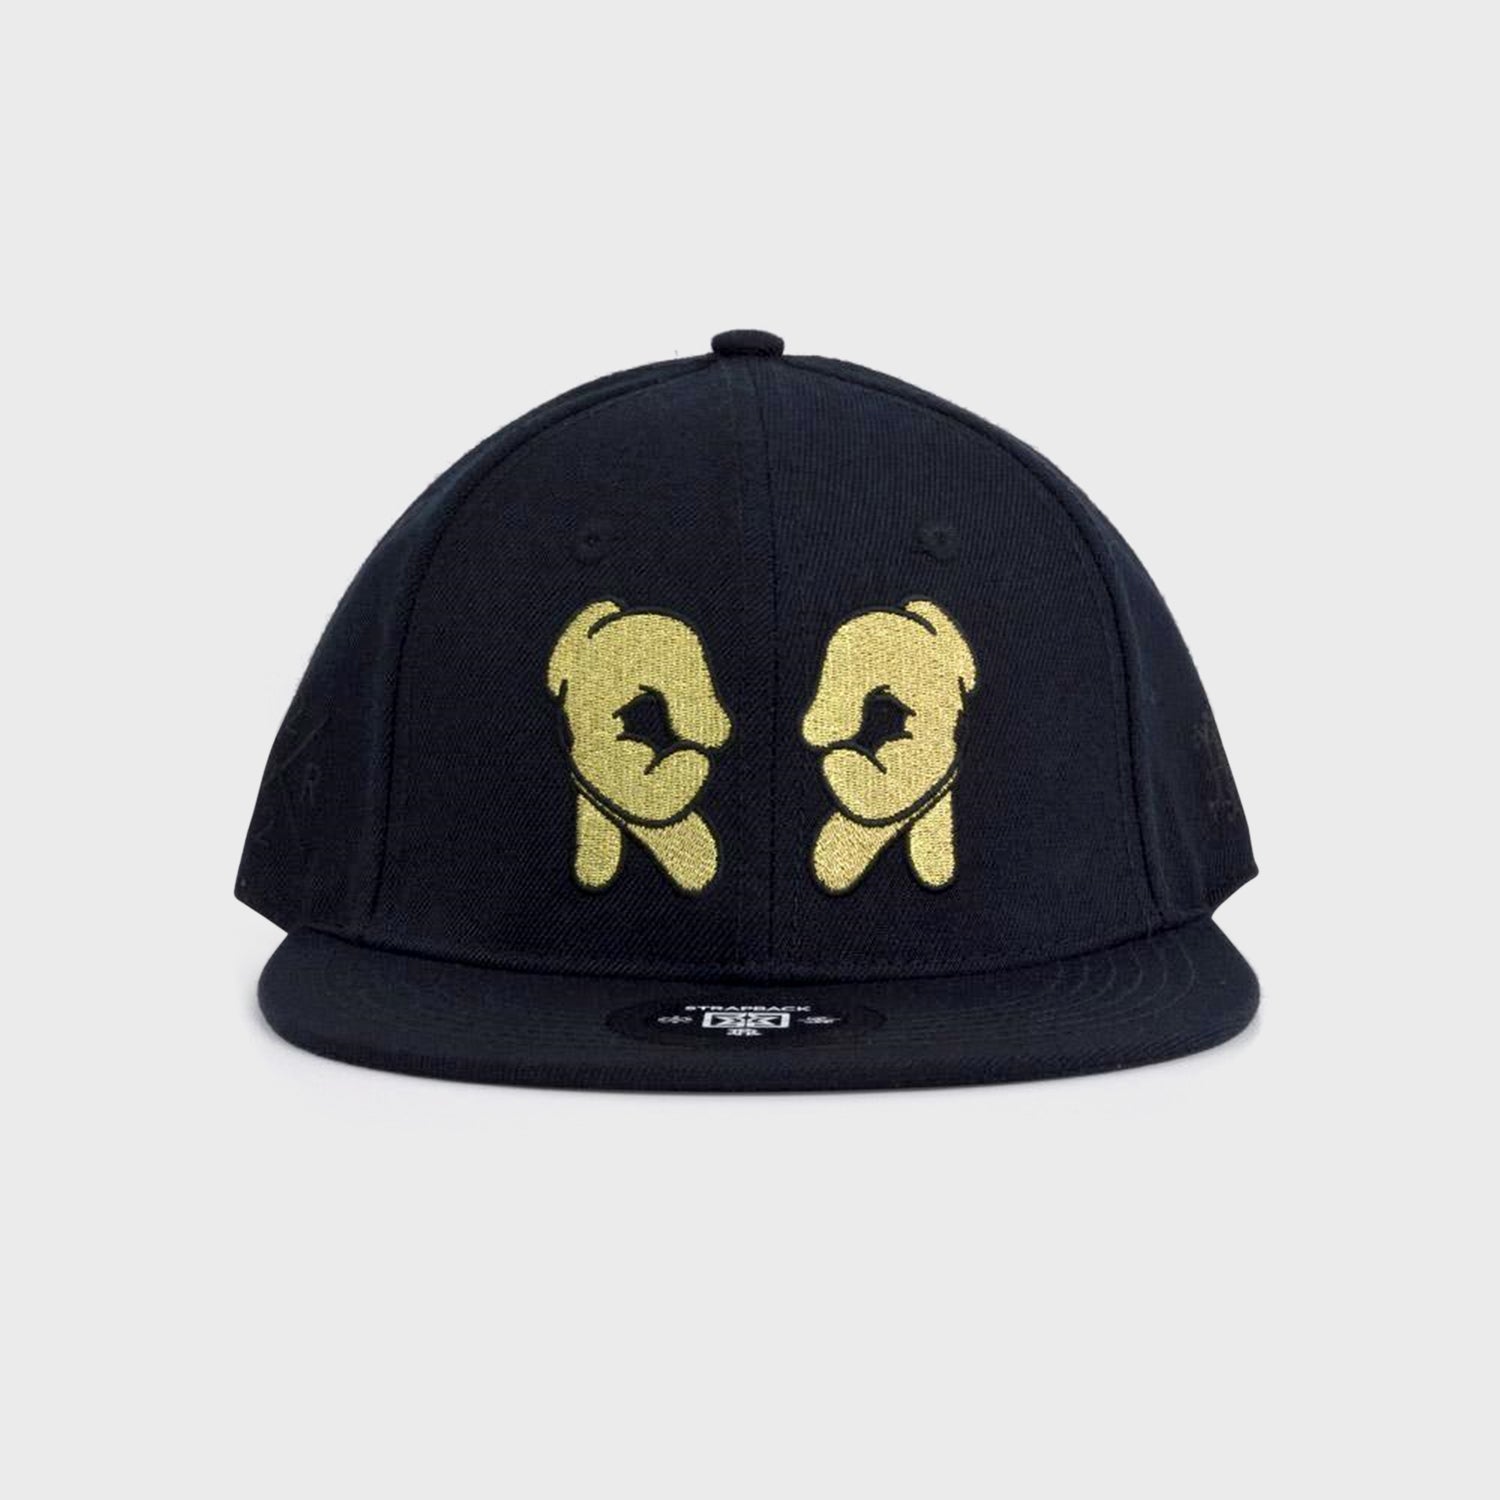 Rep Life On Two Snapback {Gold on Black}